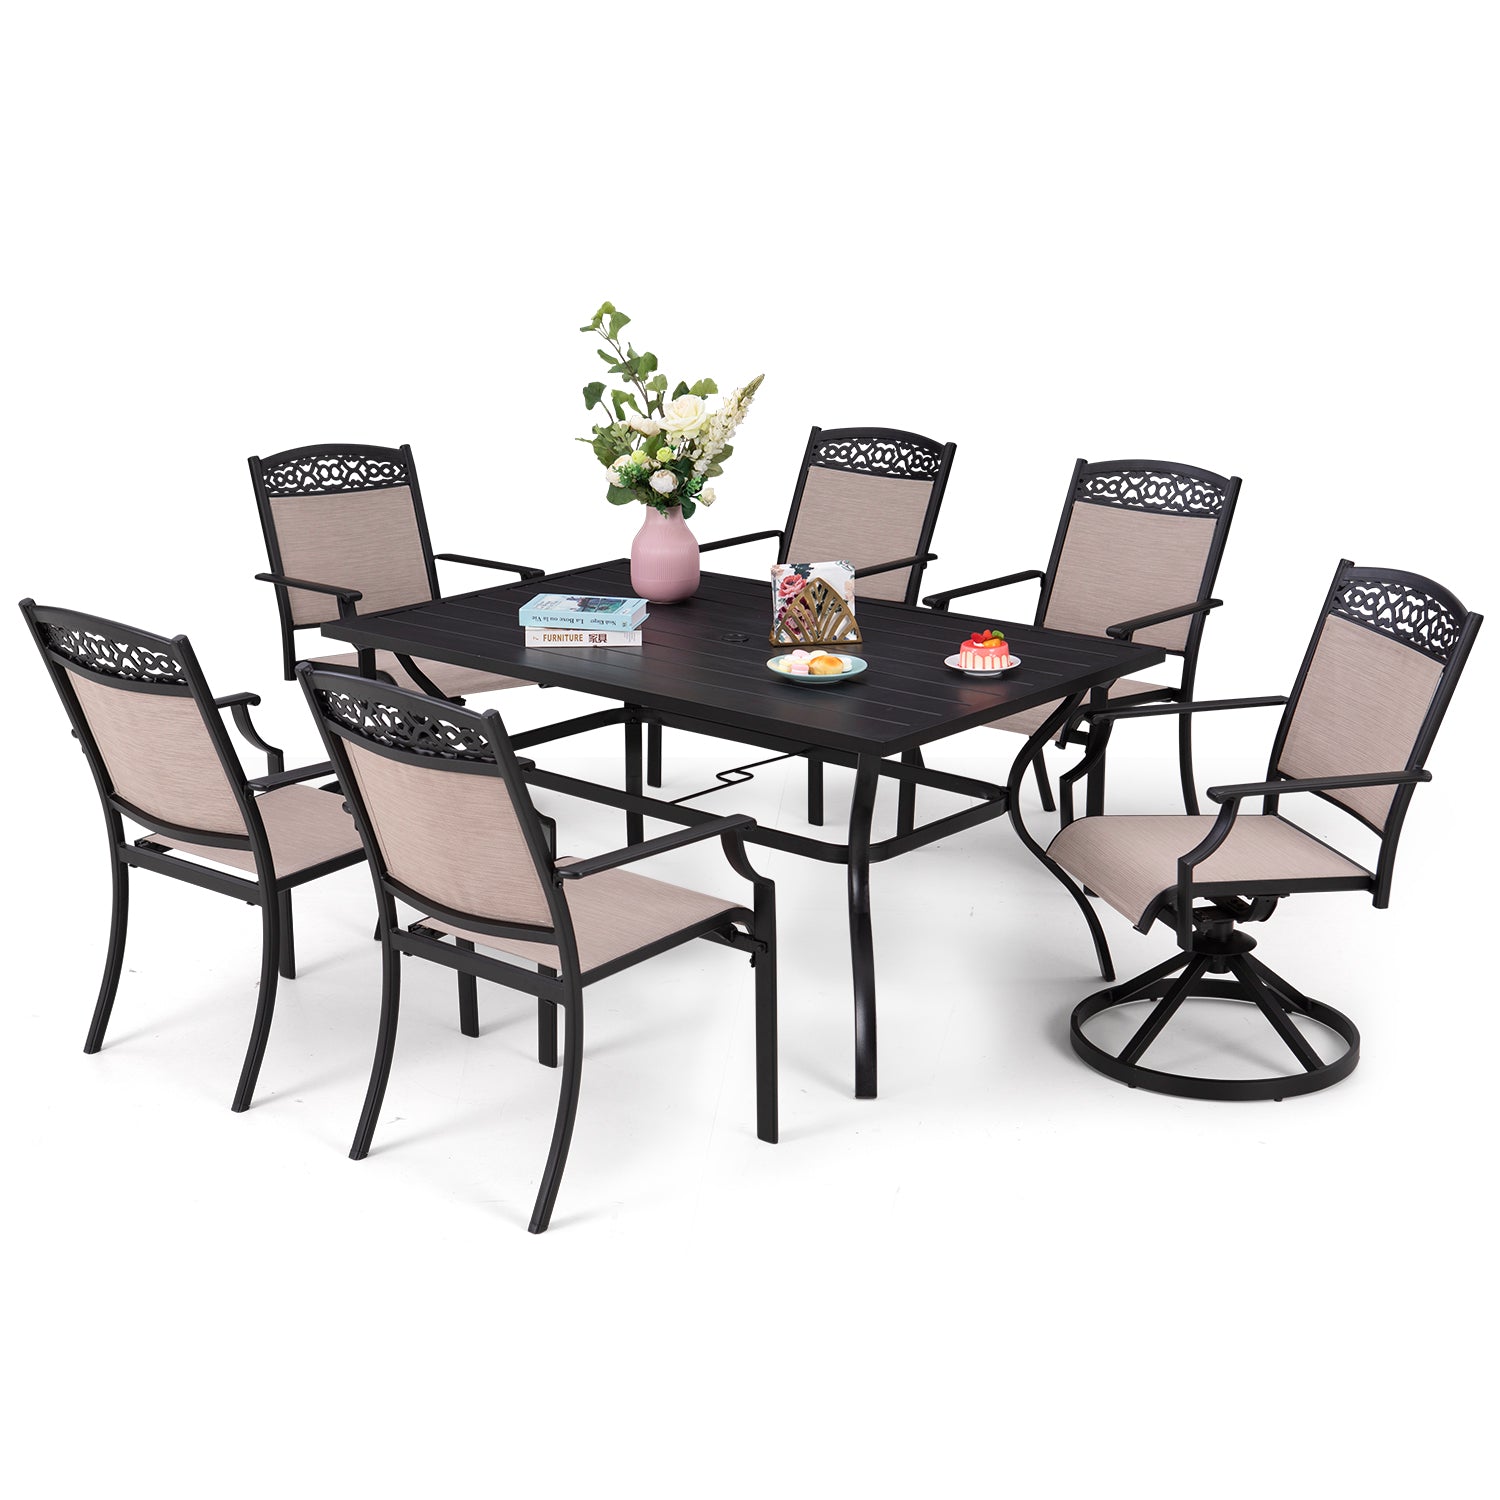 Sophia & William 7-Piece Cast Aluminum Pattern Textilene Dining Chairs & Steel Rectangle Table Outdoor Patio Dining Set